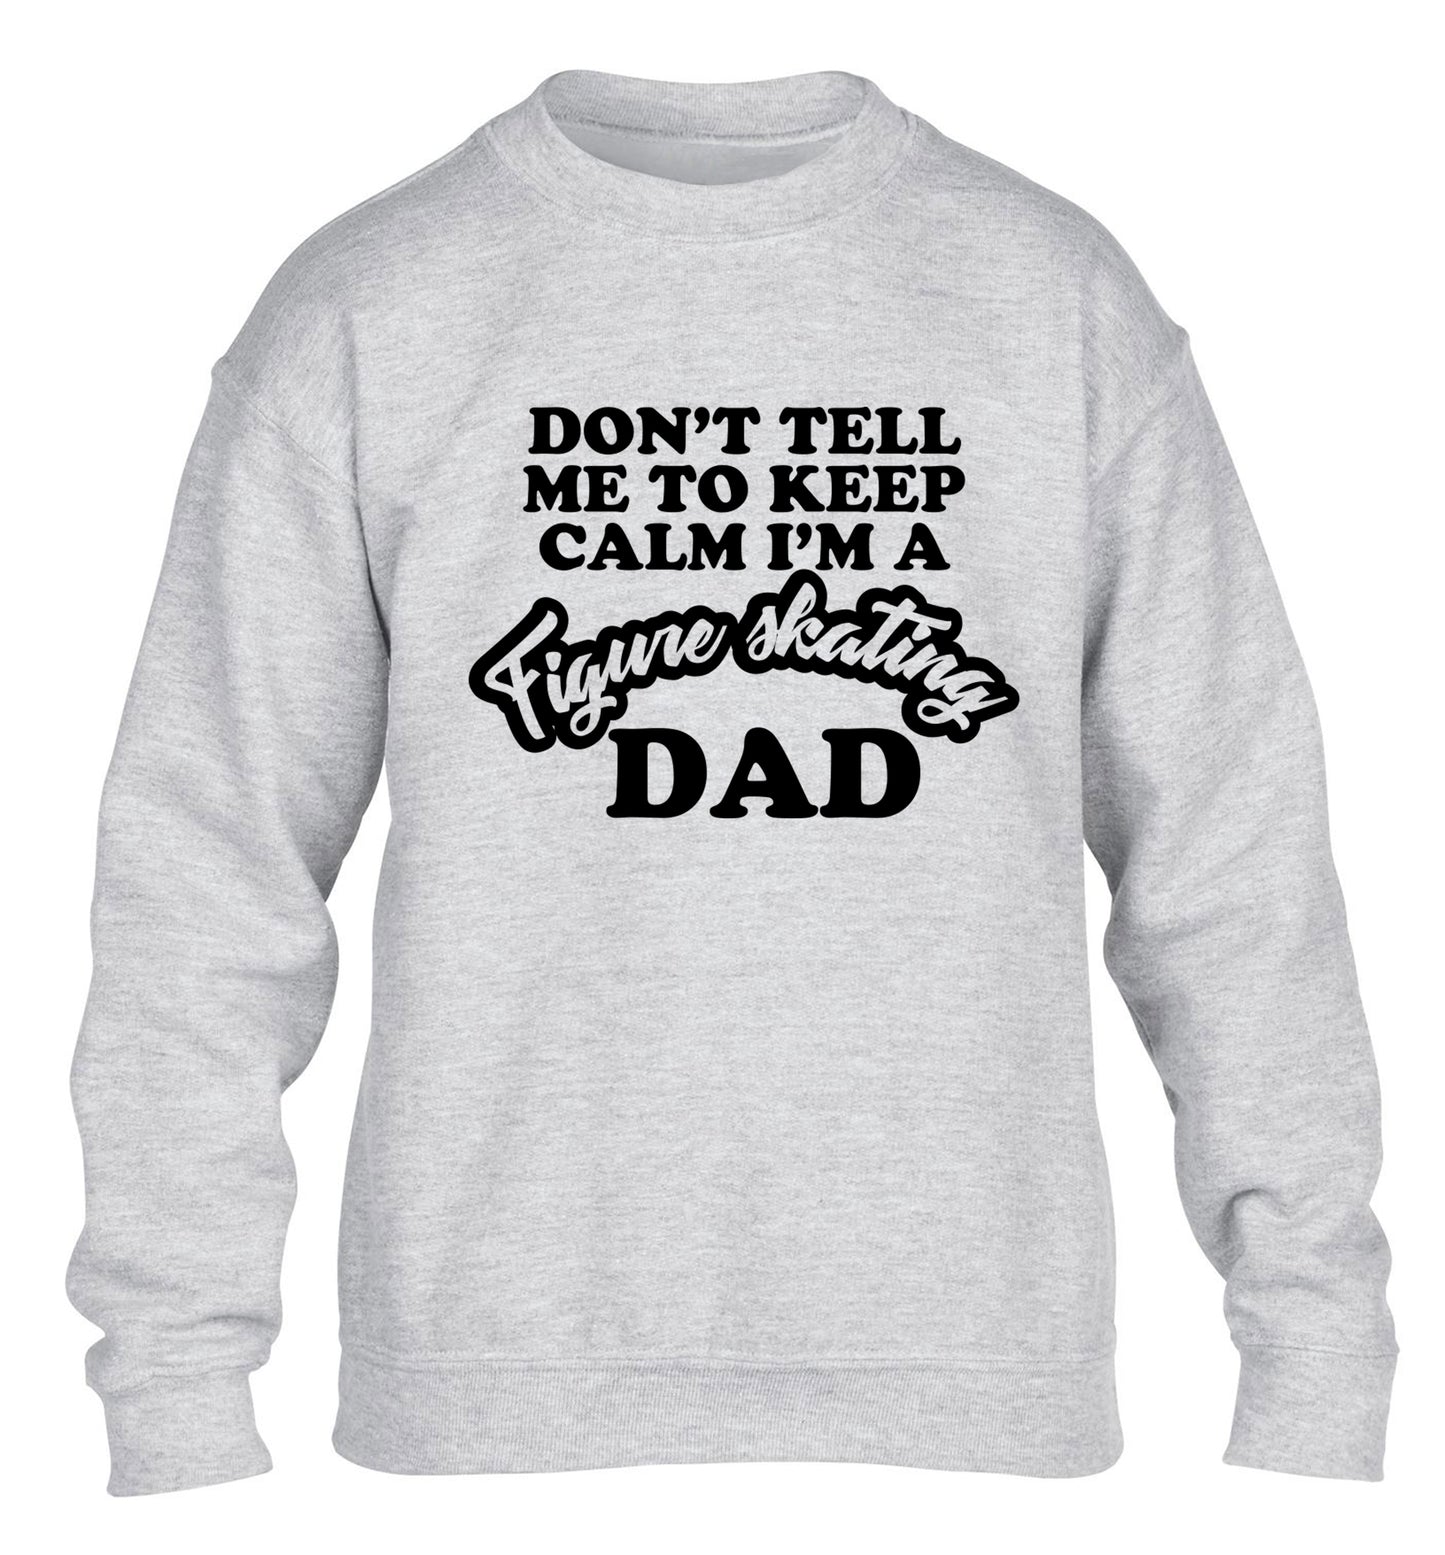 Don't tell me to keep calm I'm a figure skating dad children's grey sweater 12-14 Years